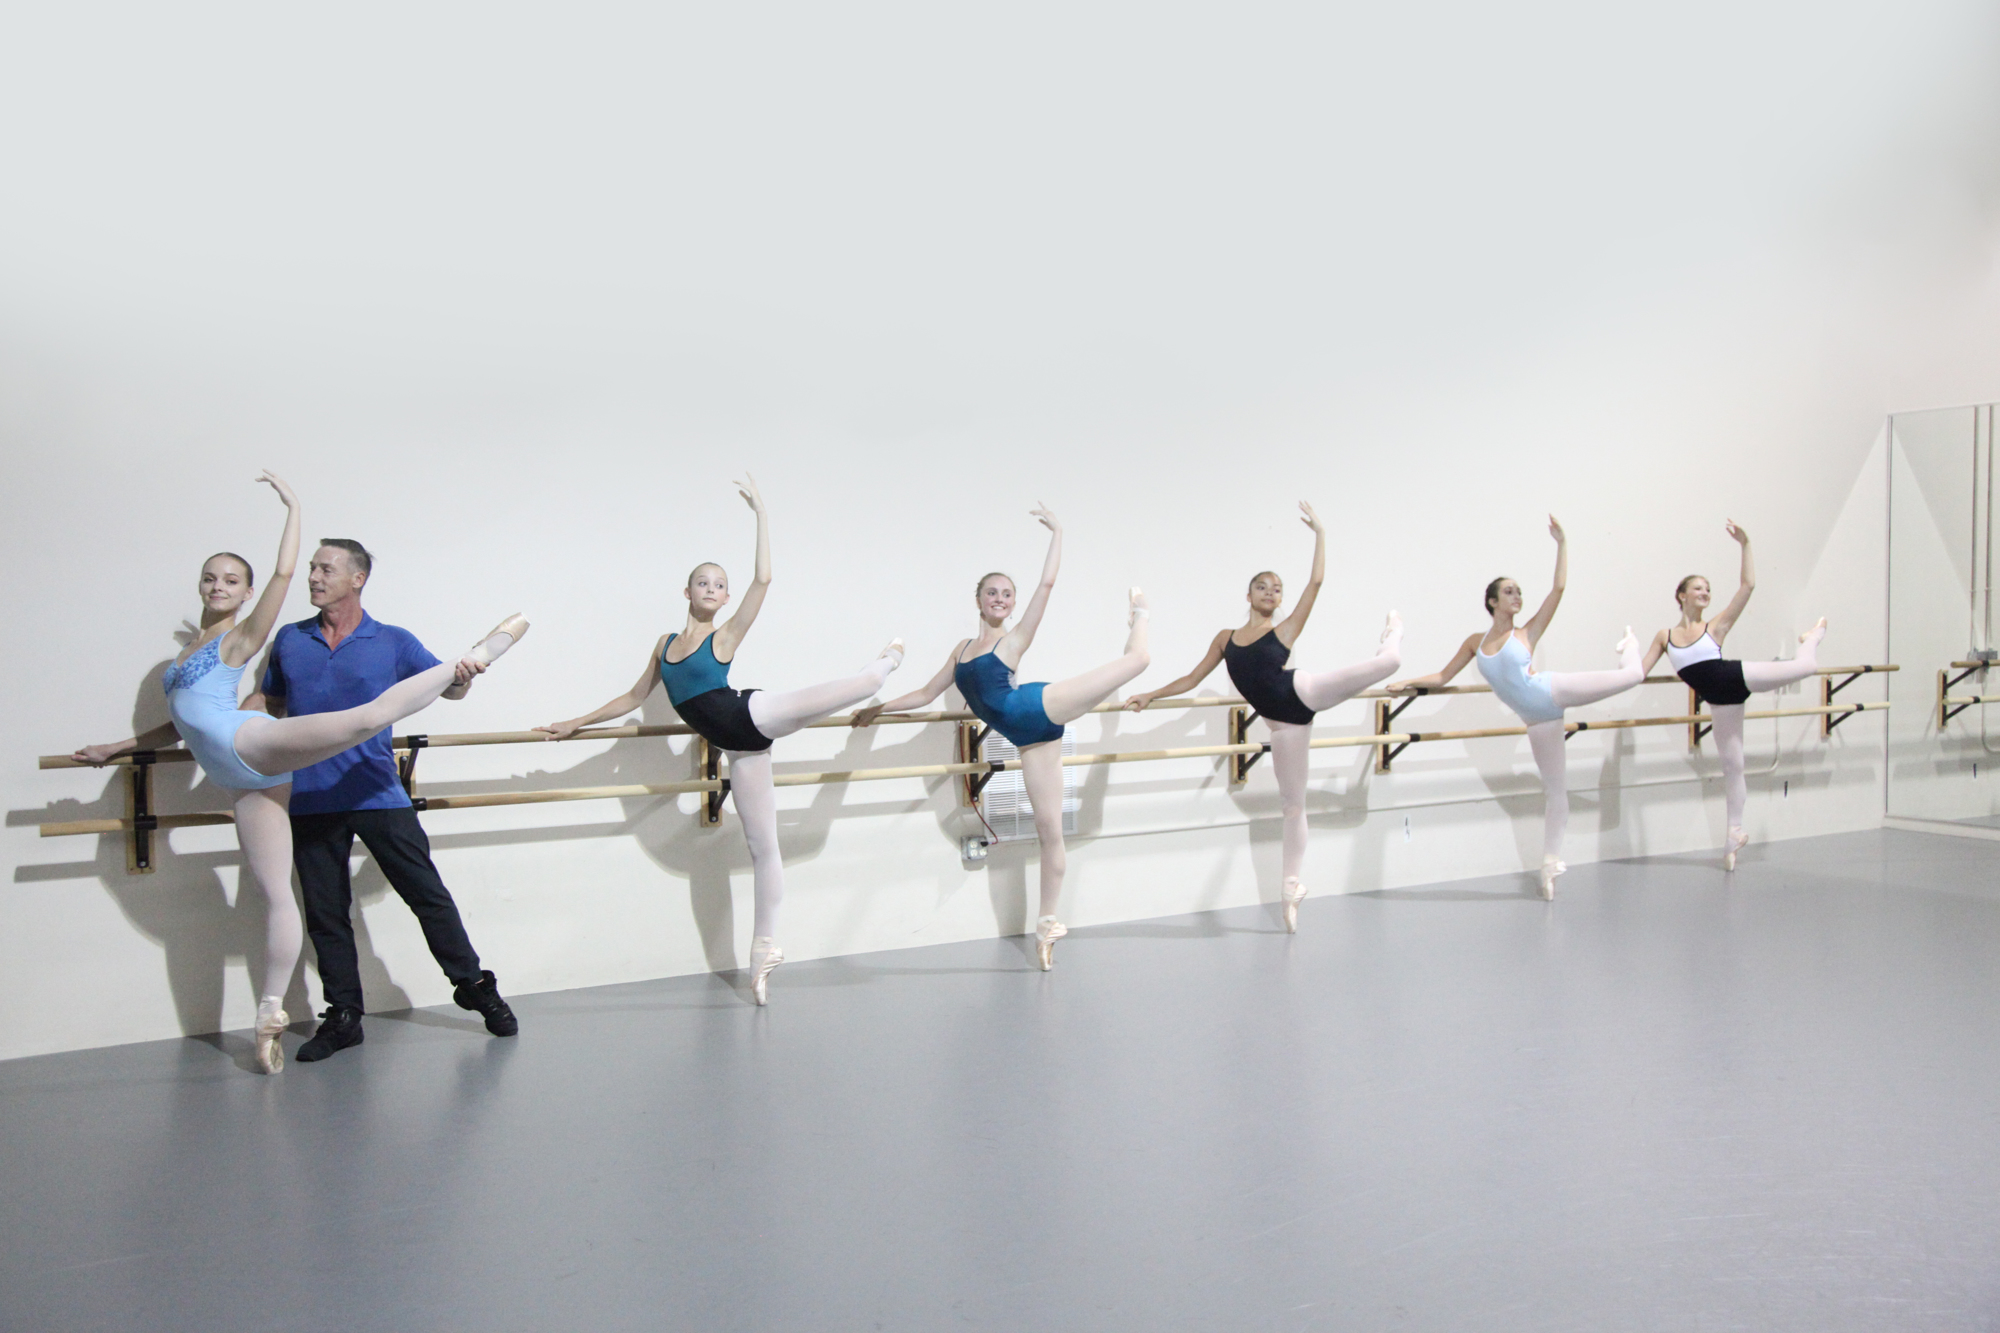 Phillip Broomhead works with Sarasota Ballet Summer Intensive students. Courtesy photo.